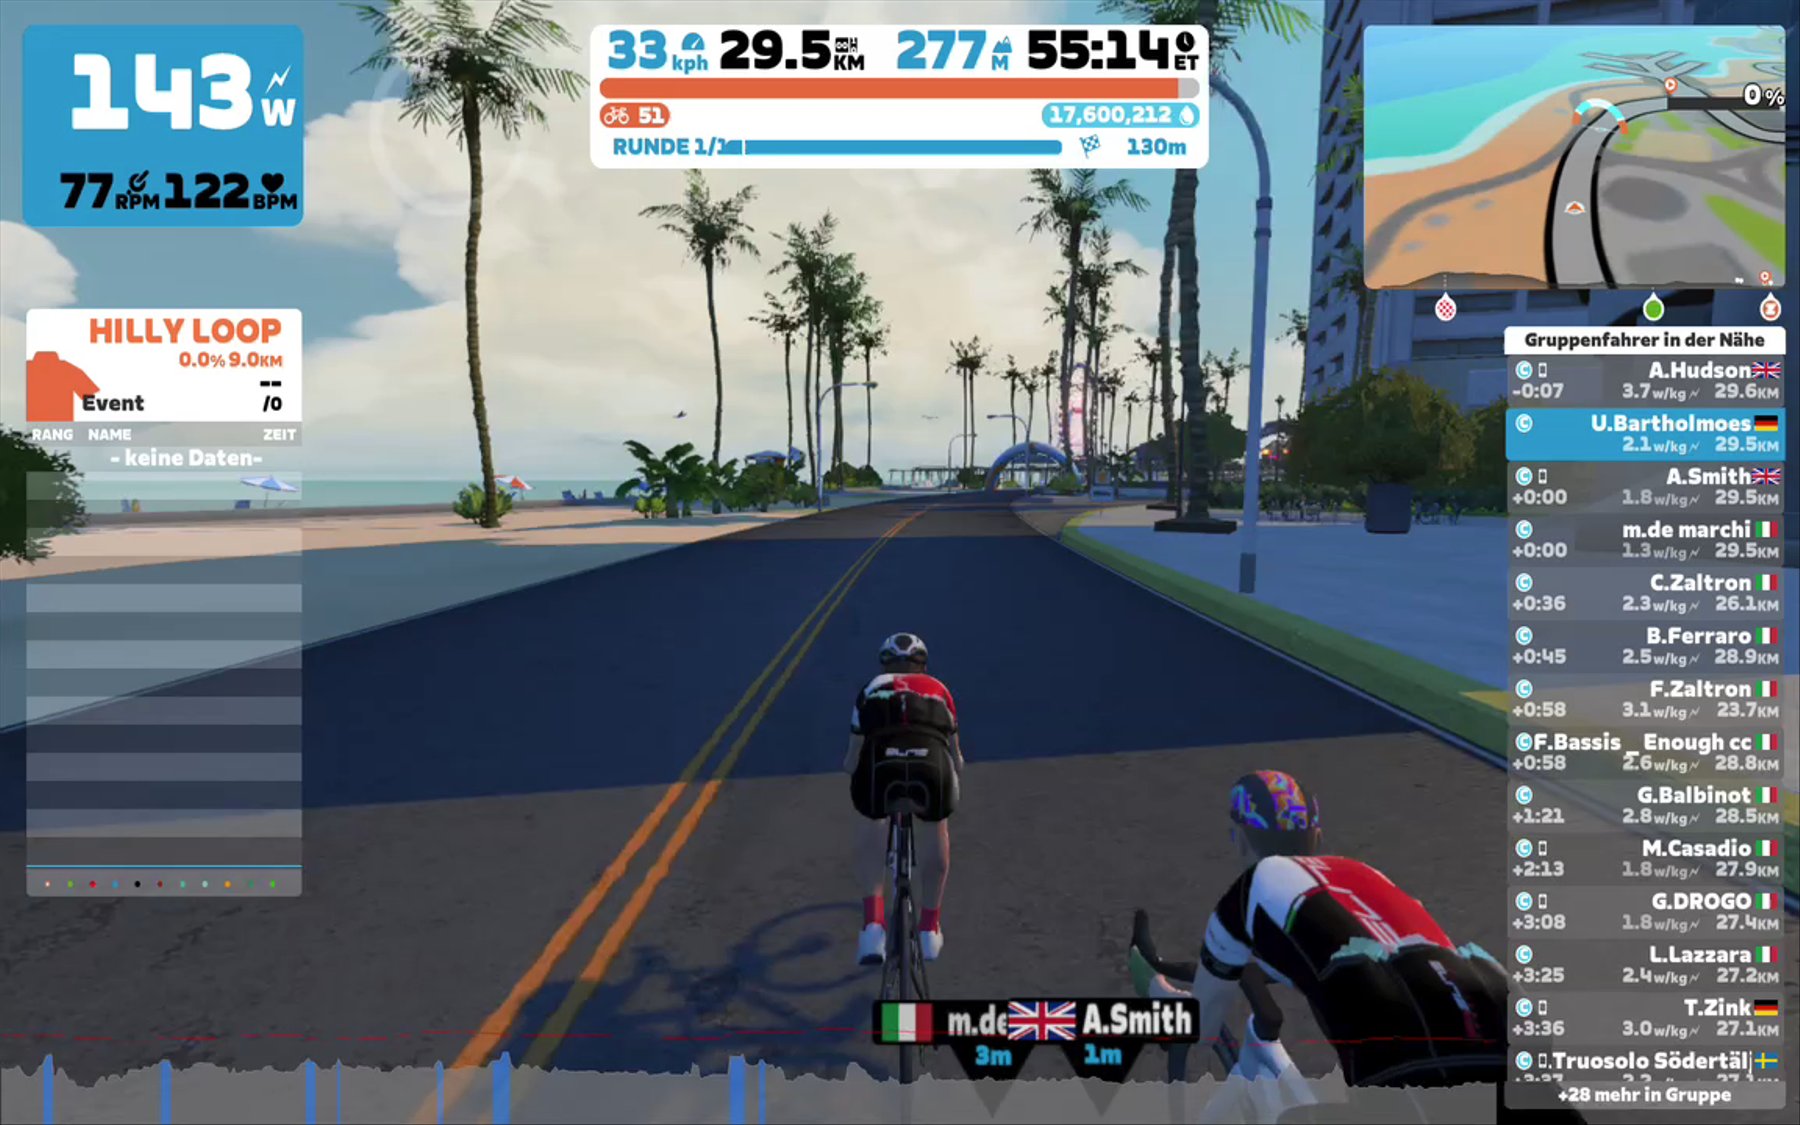 Zwift - Group Ride: Road to Ruins - Elite Cycling Social Ride on Road to Ruins in Watopia